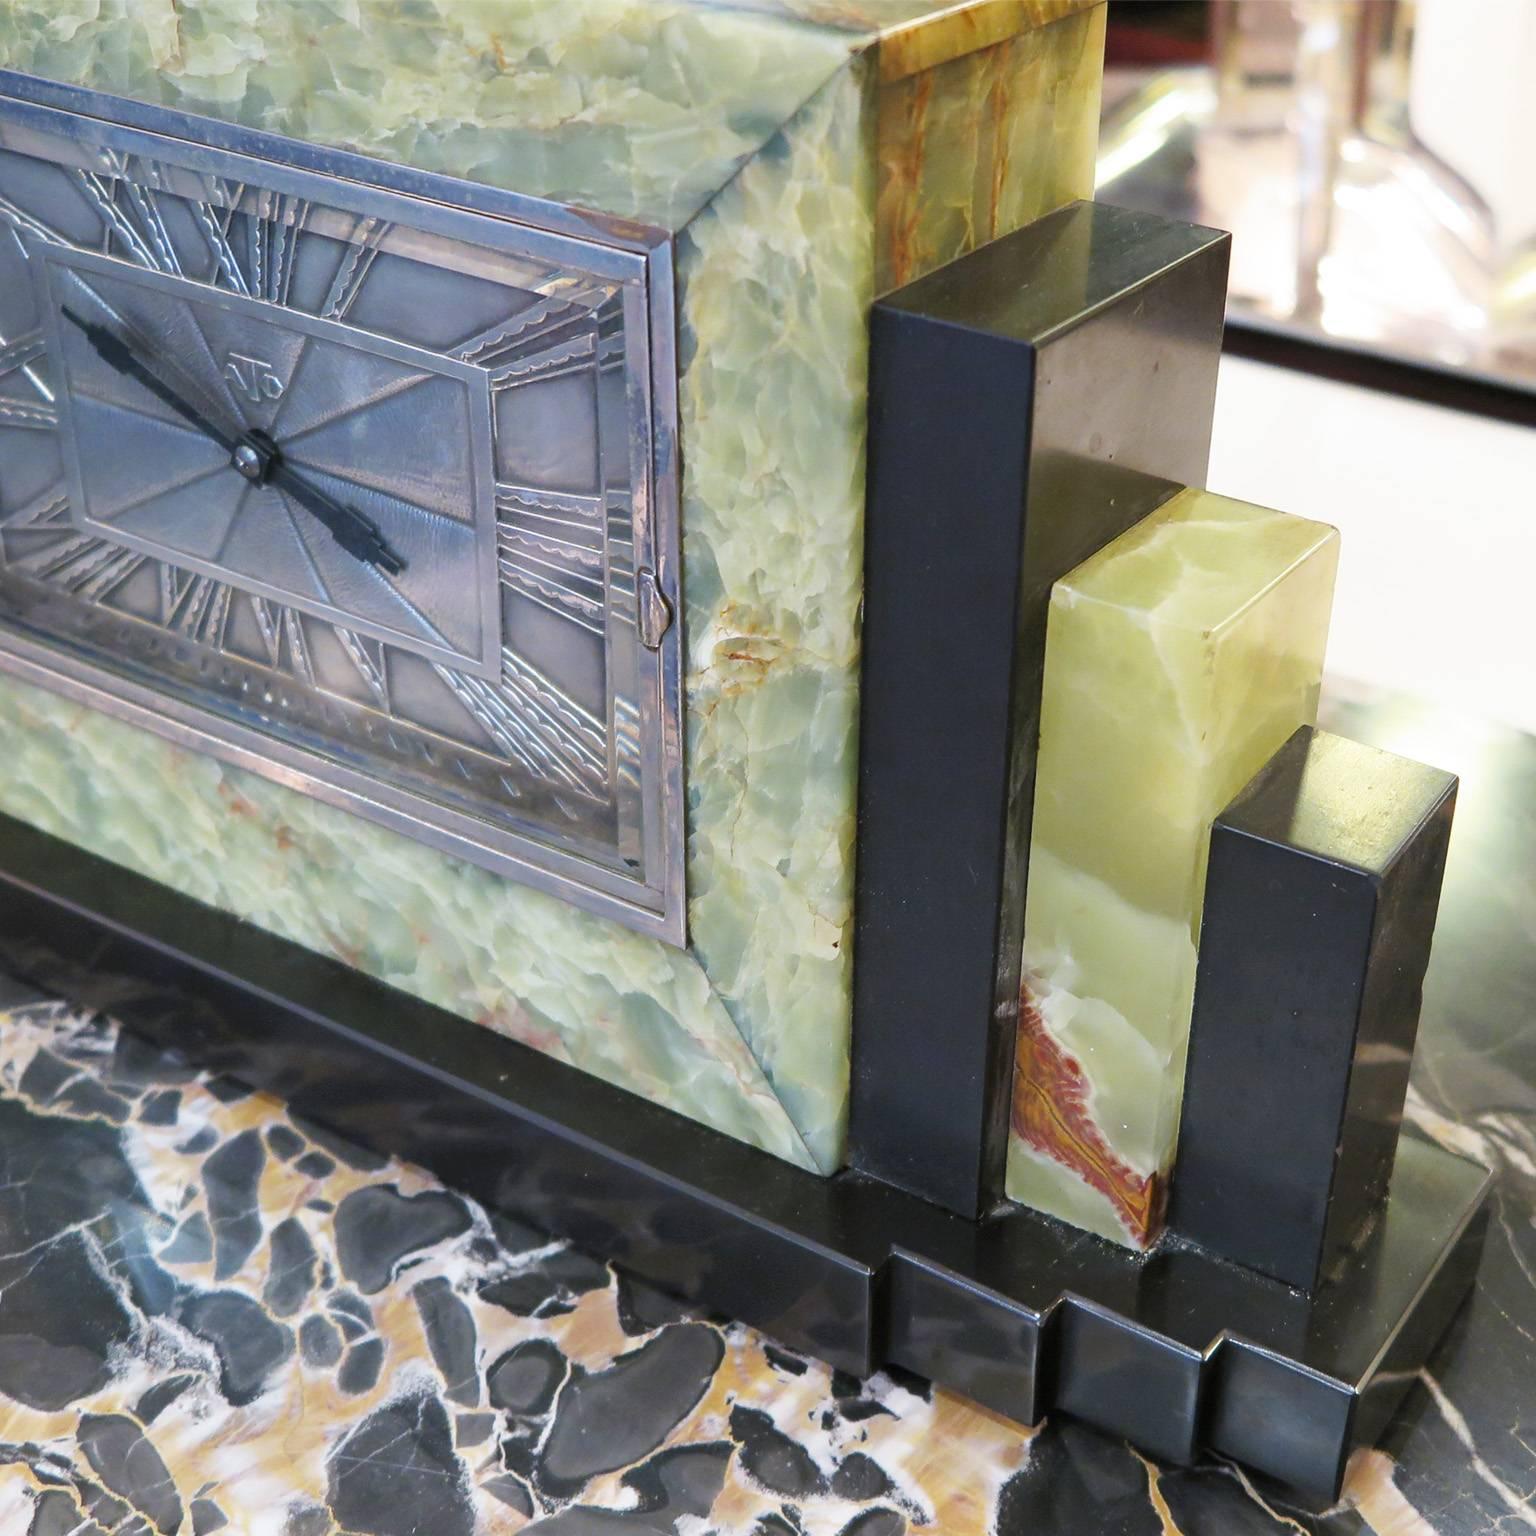 ATO clock by Leon Hatot (1883-1953.) Features stunning green onyx with black marble columns and base. Radiant dial with Arabic numerals in silver. From France, circa 1925-1930.